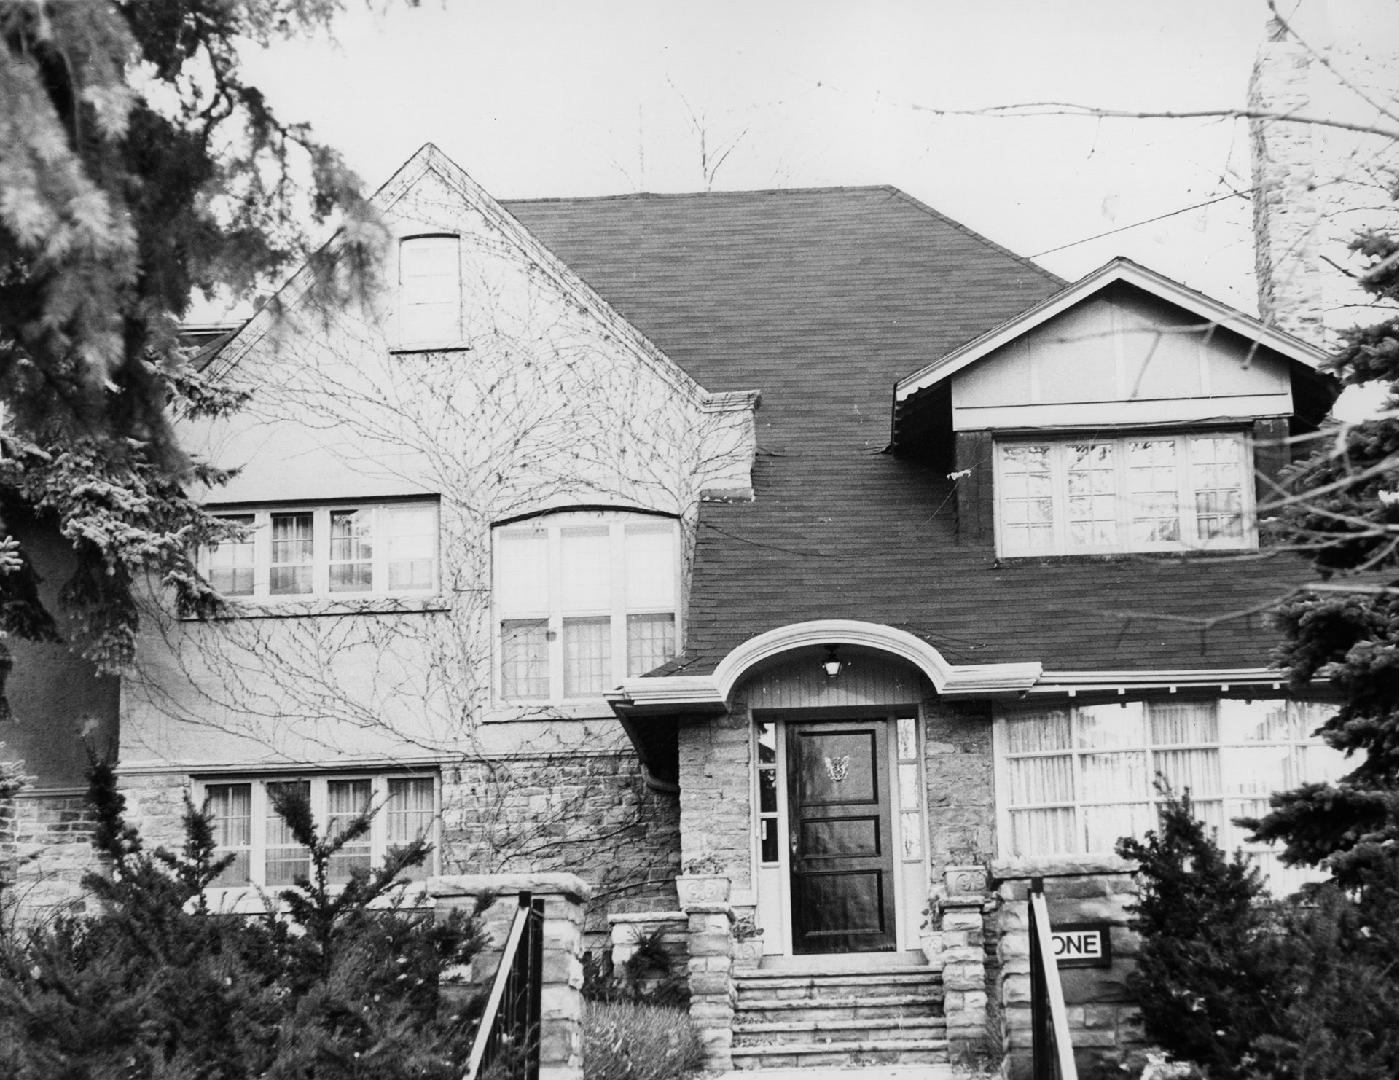 John Firstbrook House, St. Edmunds Drive at Weybourne Crescent, Toronto, Ontario. Image shows a ...